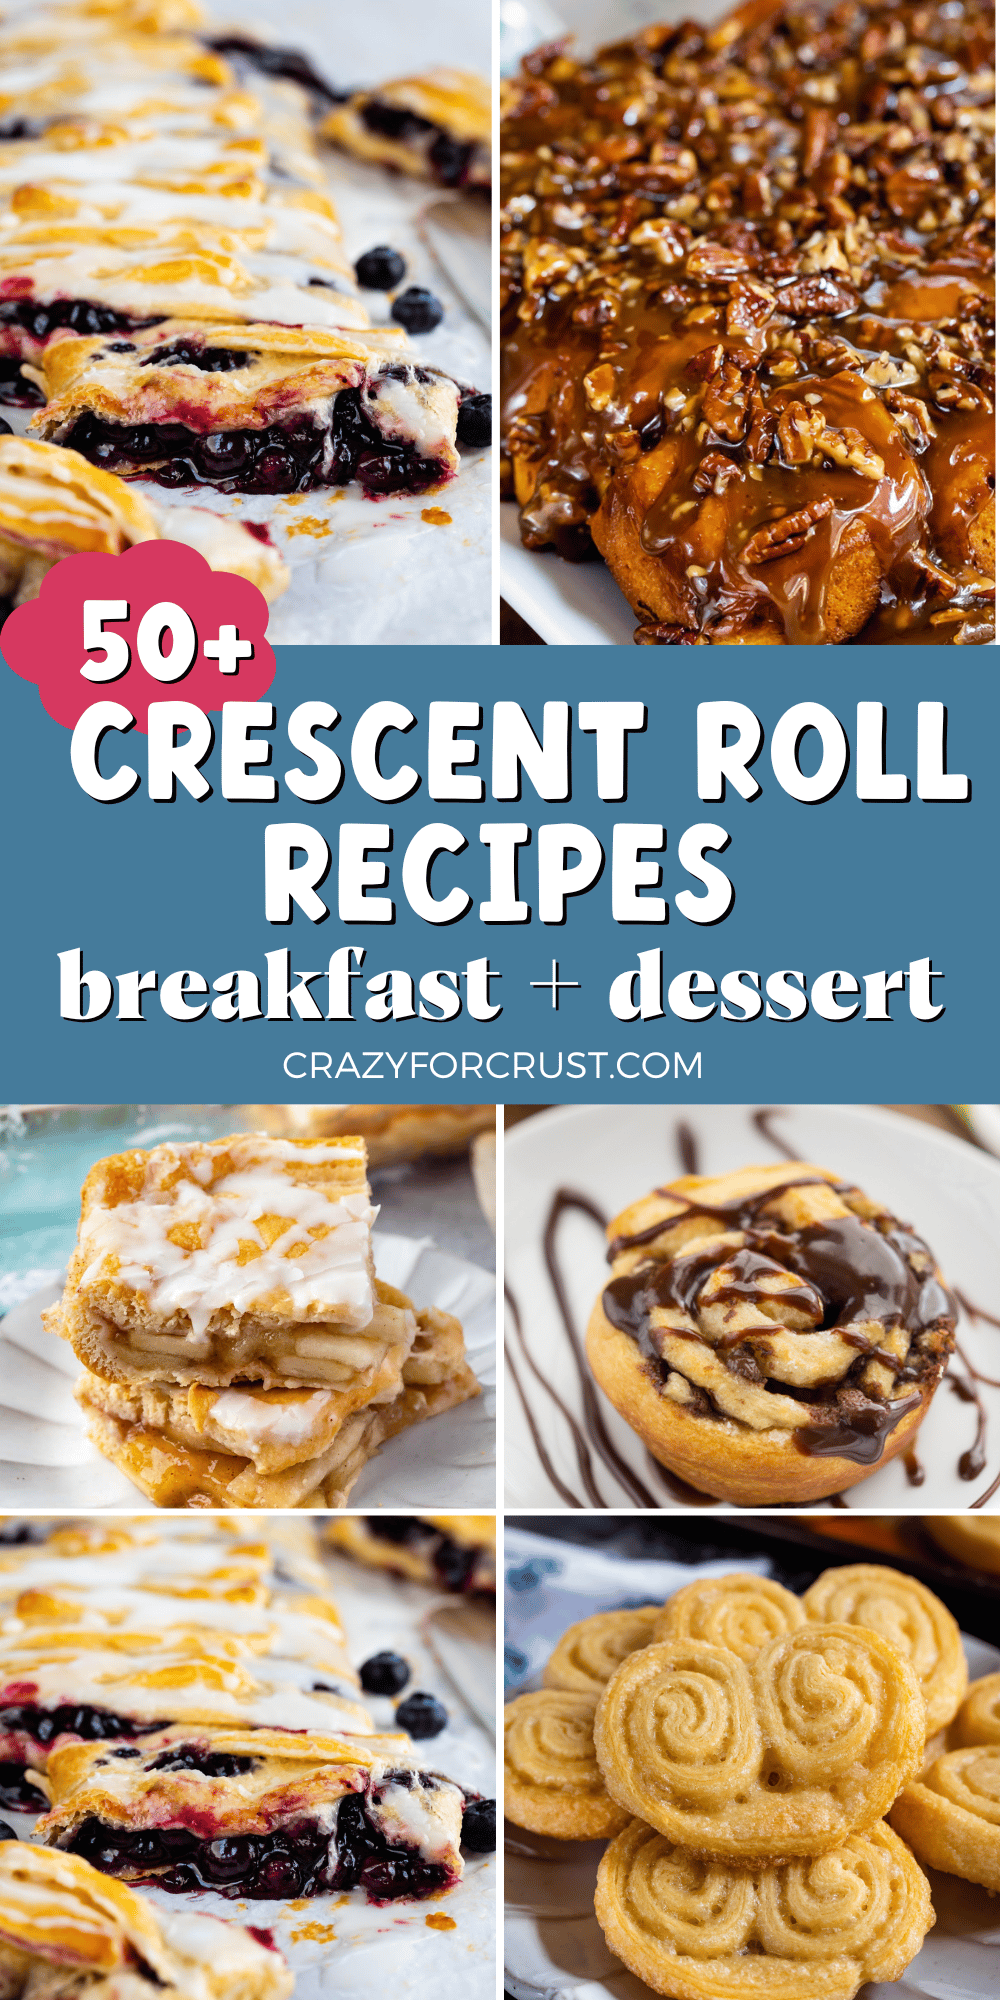 6 photos showing how to use crescent rolls